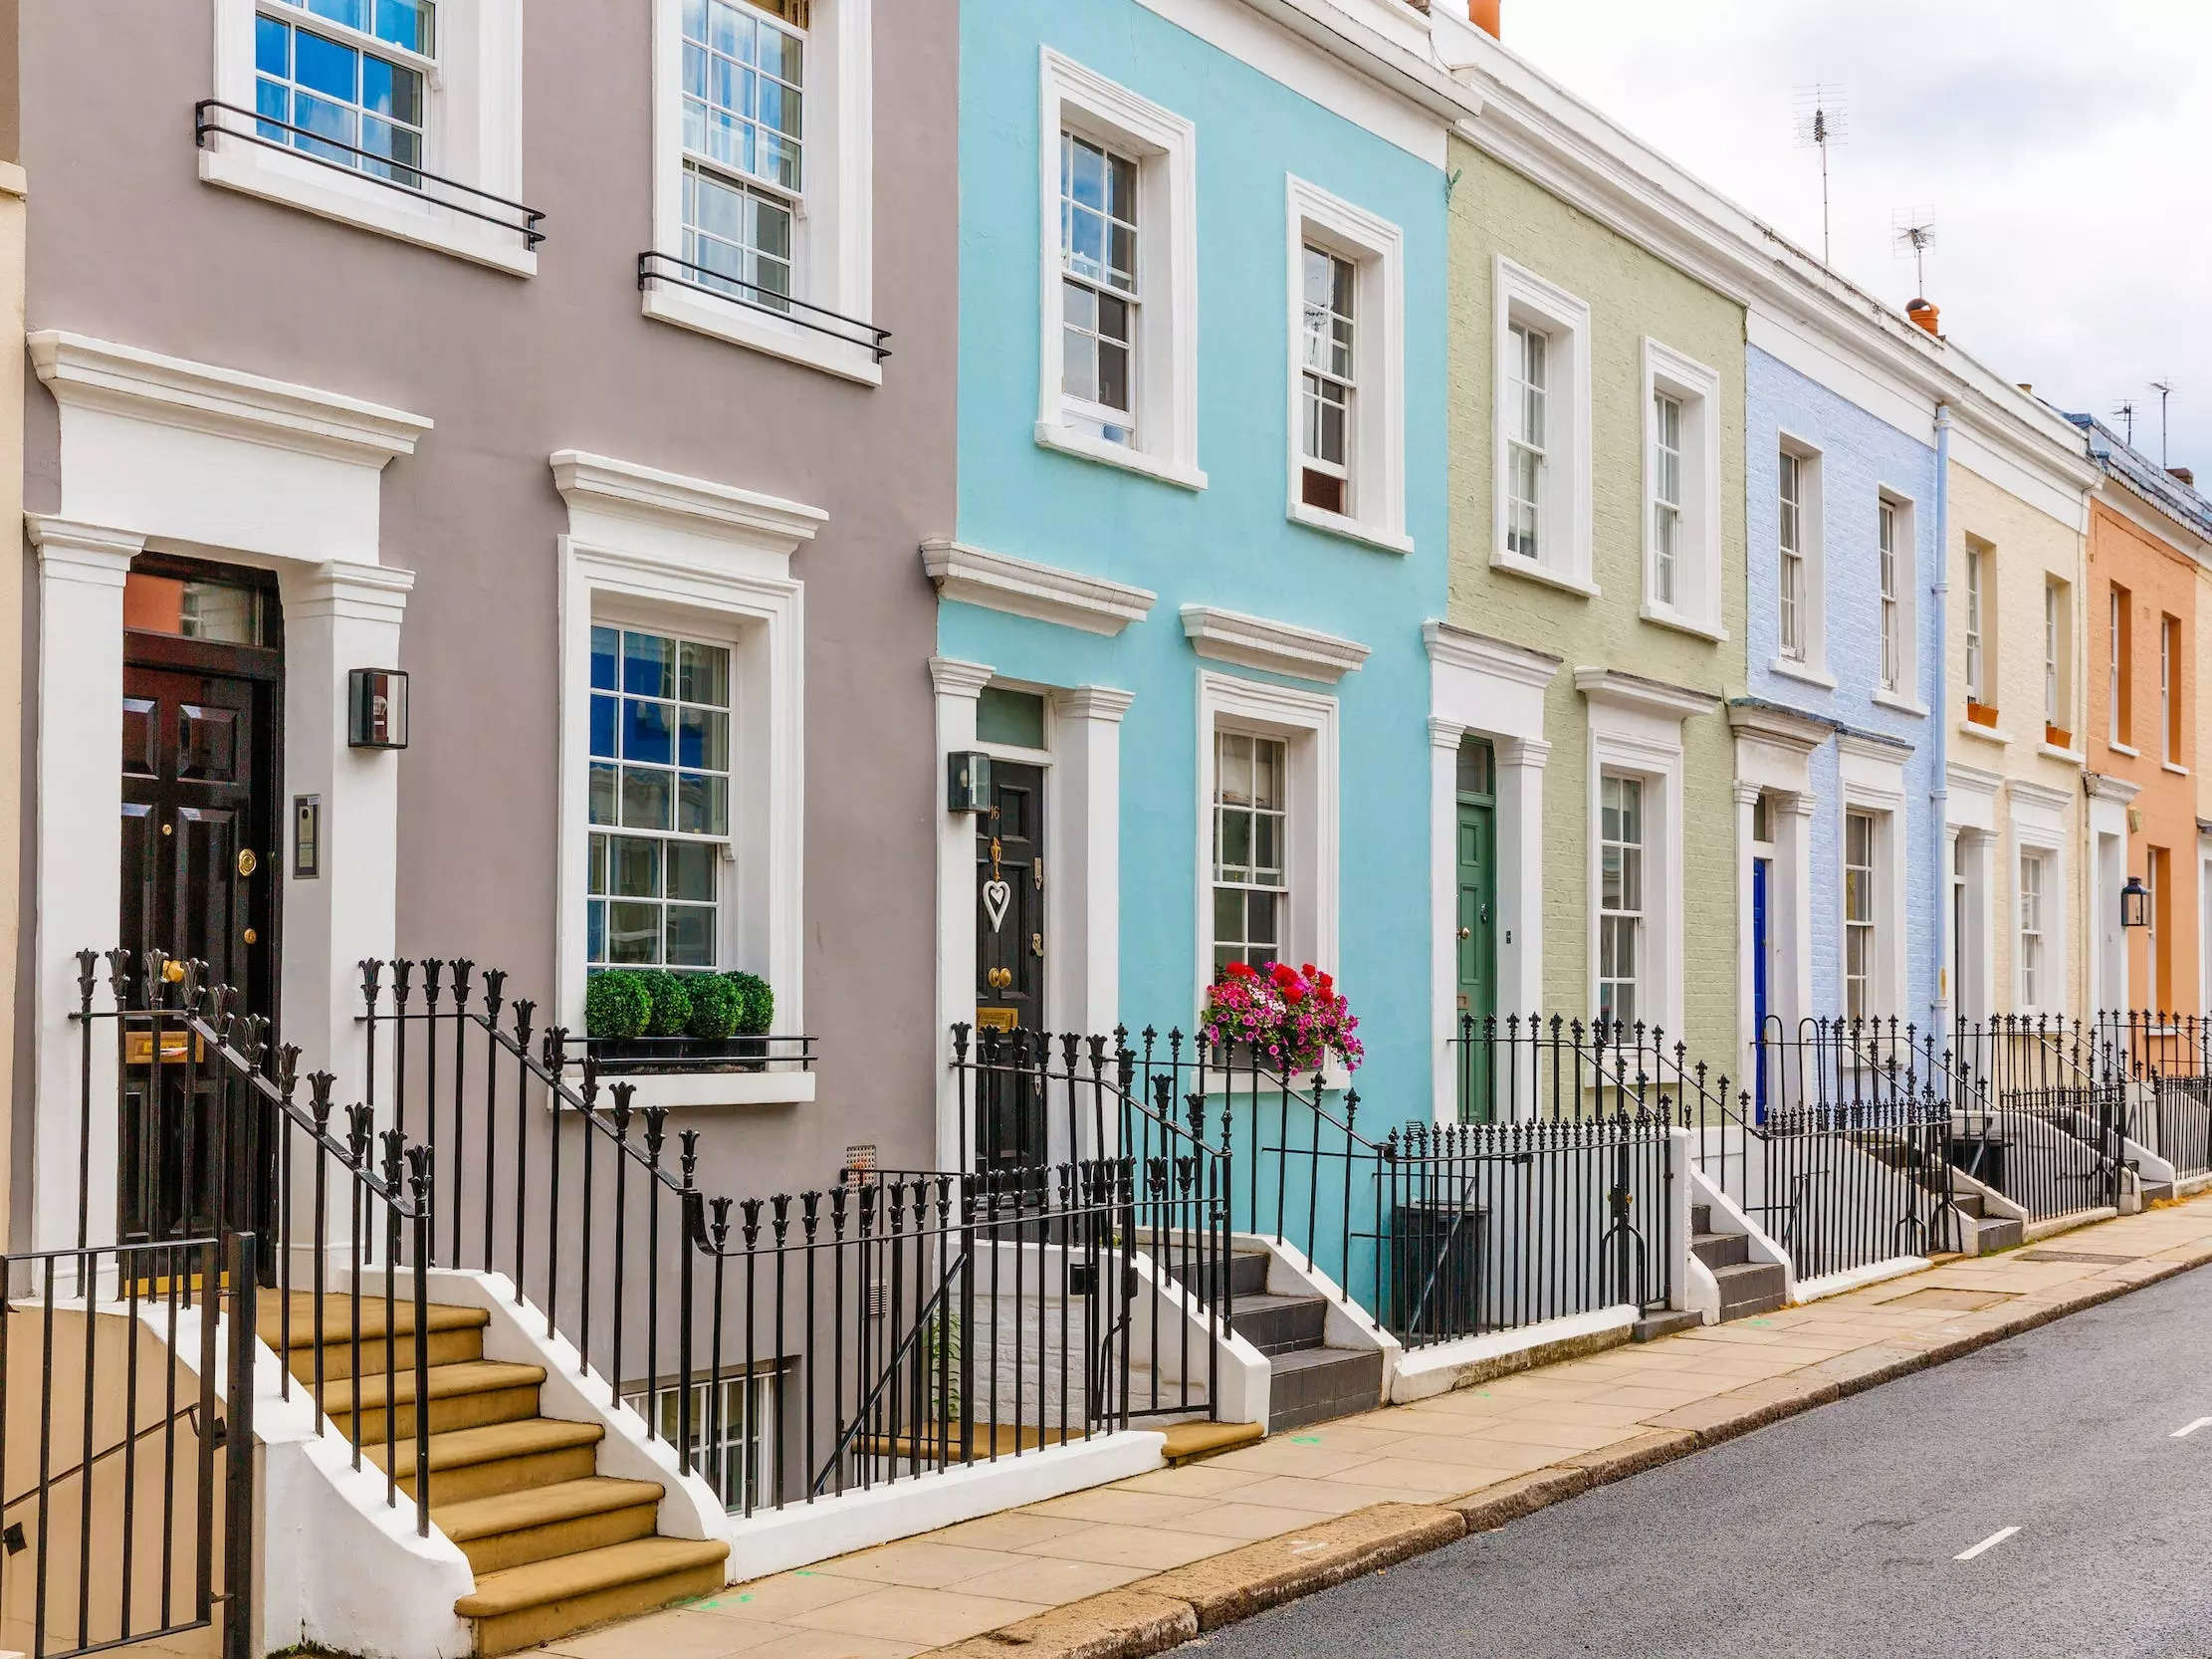 Colorful townhomes in London, England.